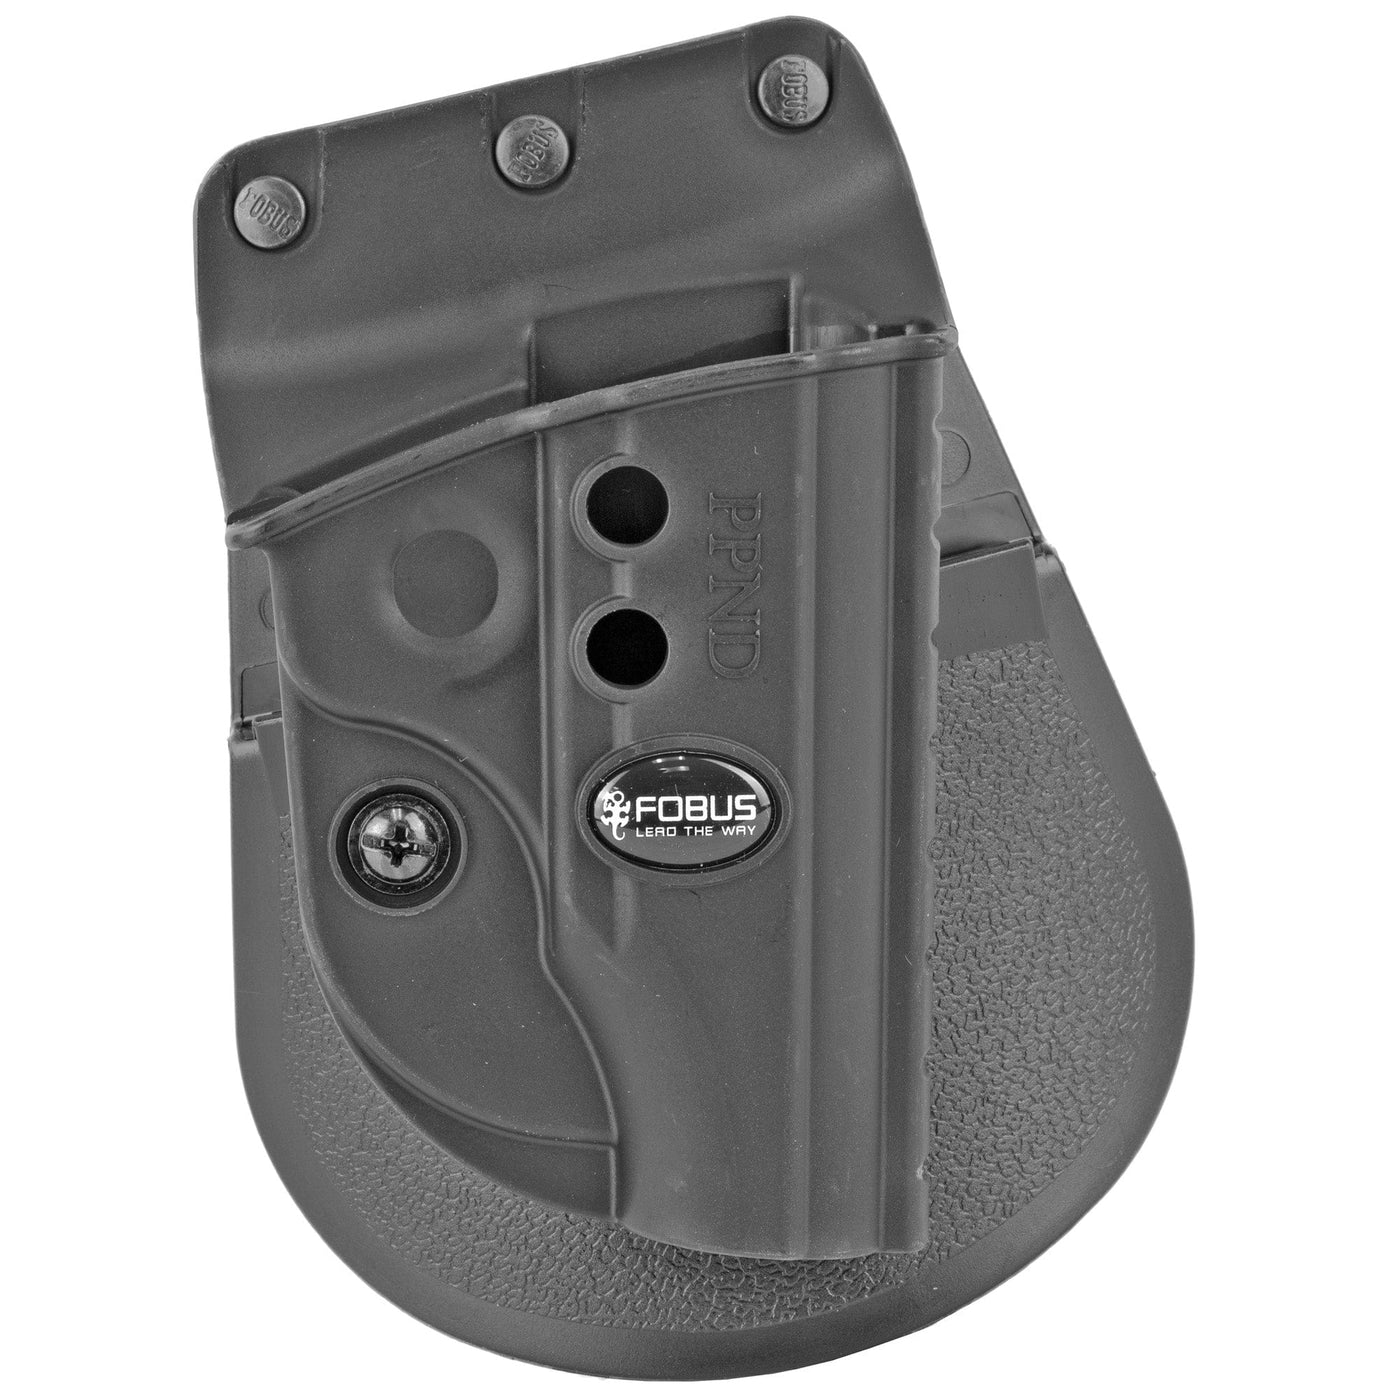 Fobus Fobus Holster E2 Paddle For - Walther Pp Ppk Ppks .380's Firearm Accessories